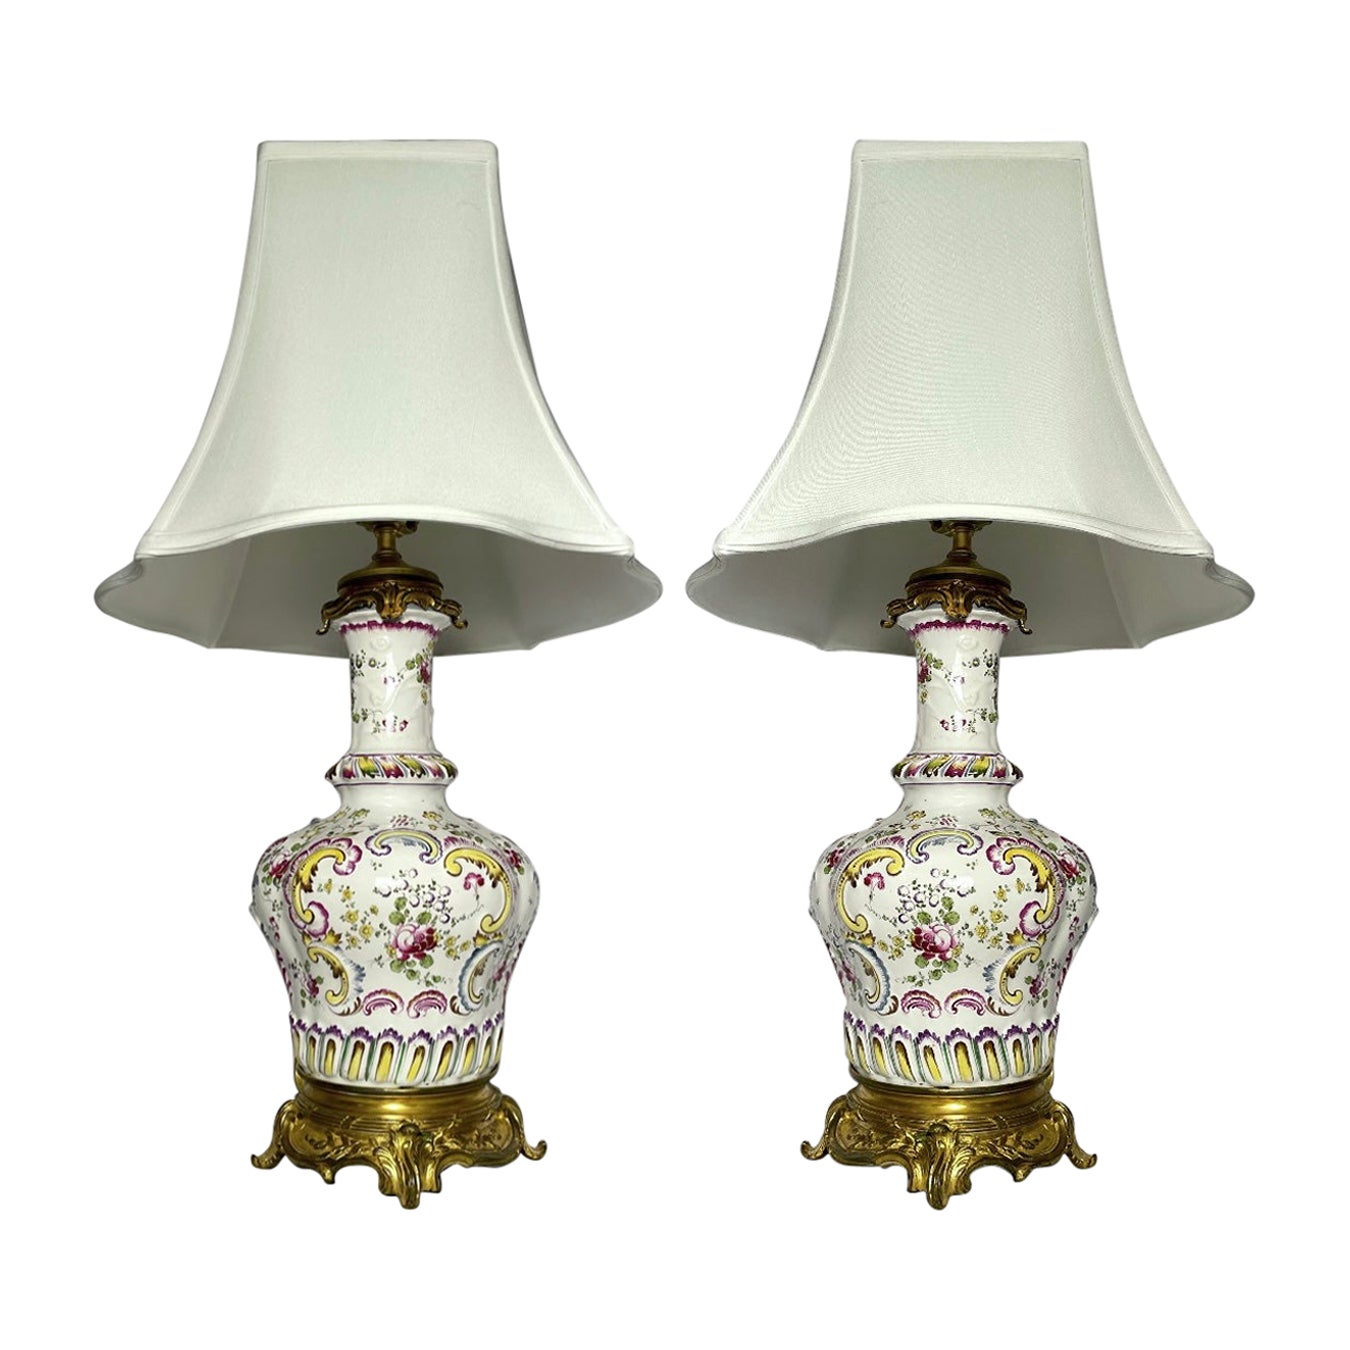 Antique French Porcelain and Gold Bronze Mounted Lamps, circa 1890.